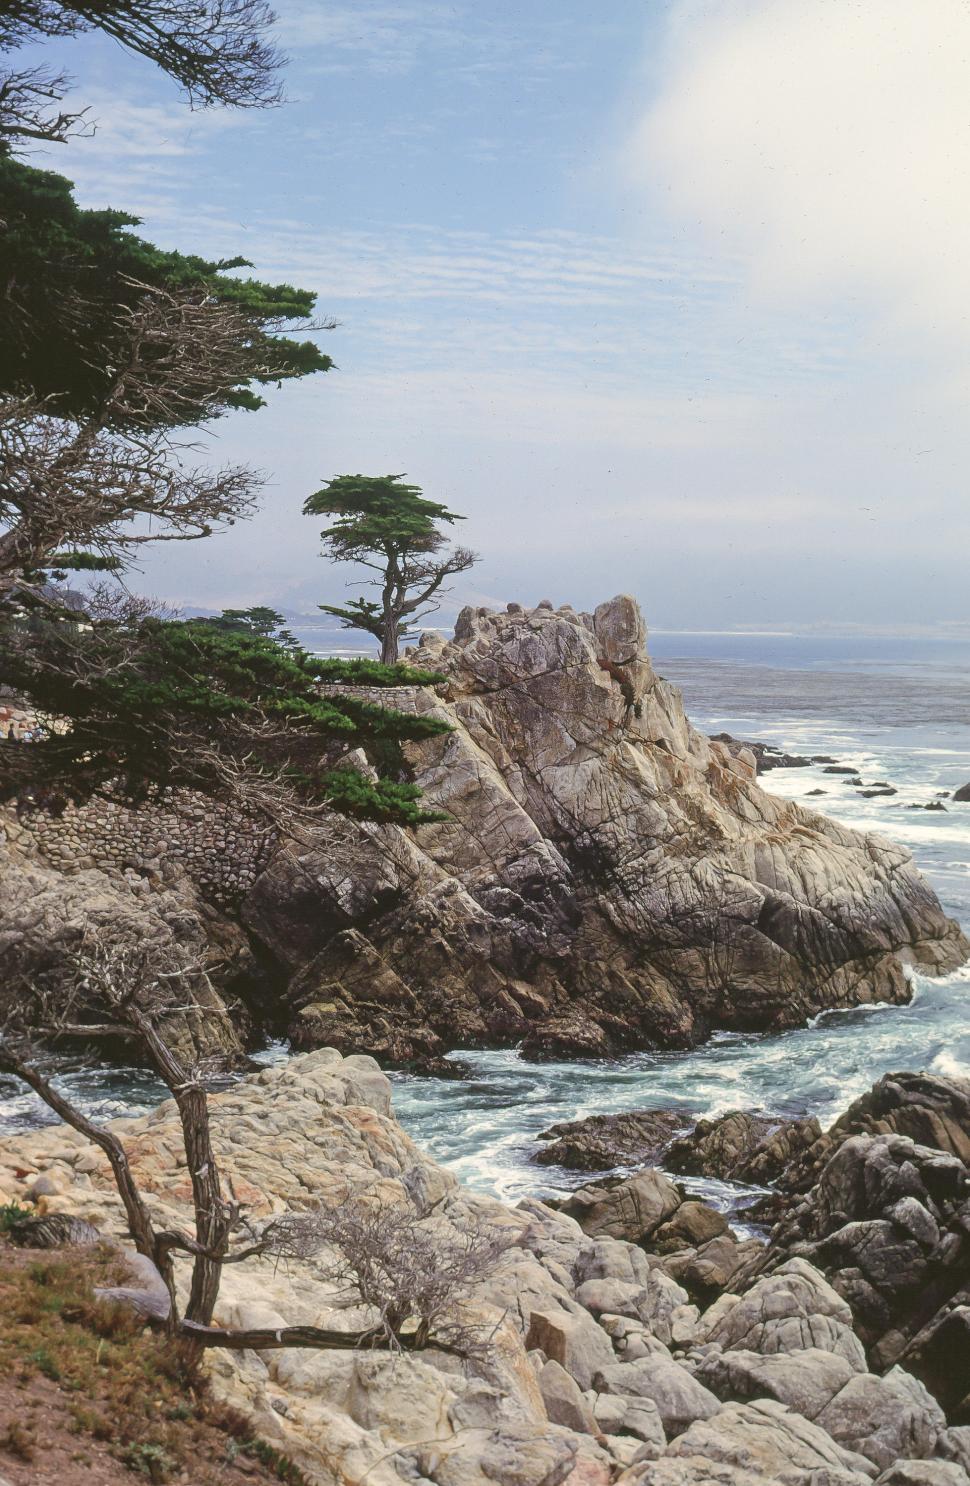 Free Image of Ocean, Trees and Rocks 